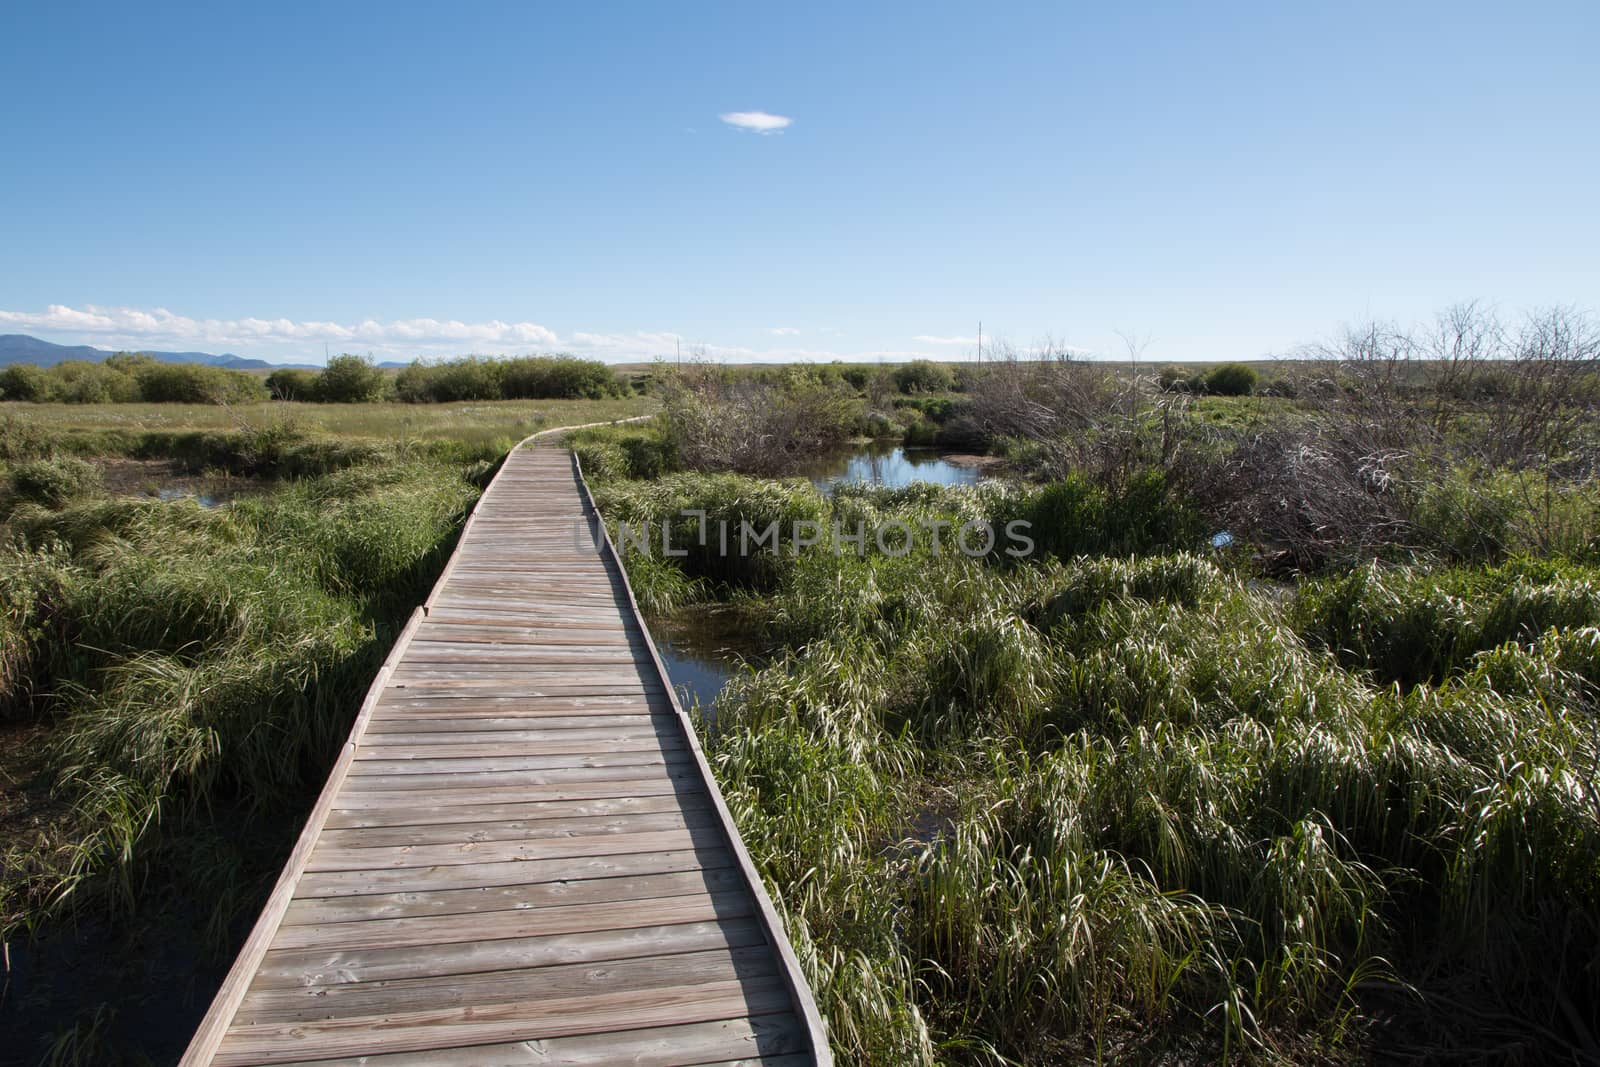 An old wooden footpath crosses a marshy riparian area, featuring long grass and mountains and clouds in the distance